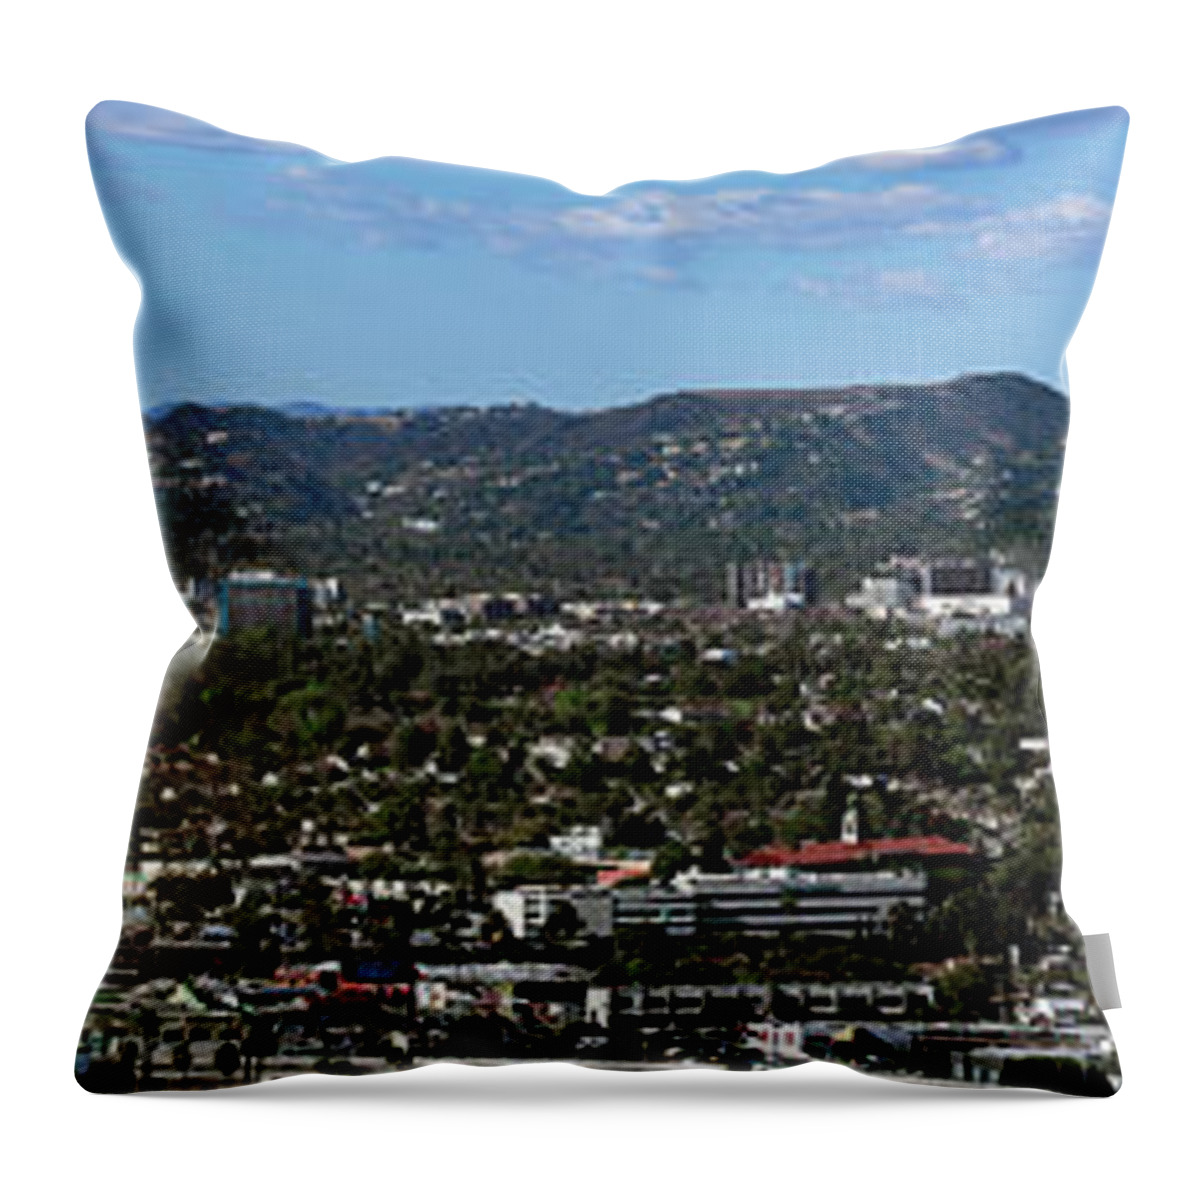 Photography Throw Pillow featuring the photograph Elevated View Of Buildings In City #3 by Panoramic Images